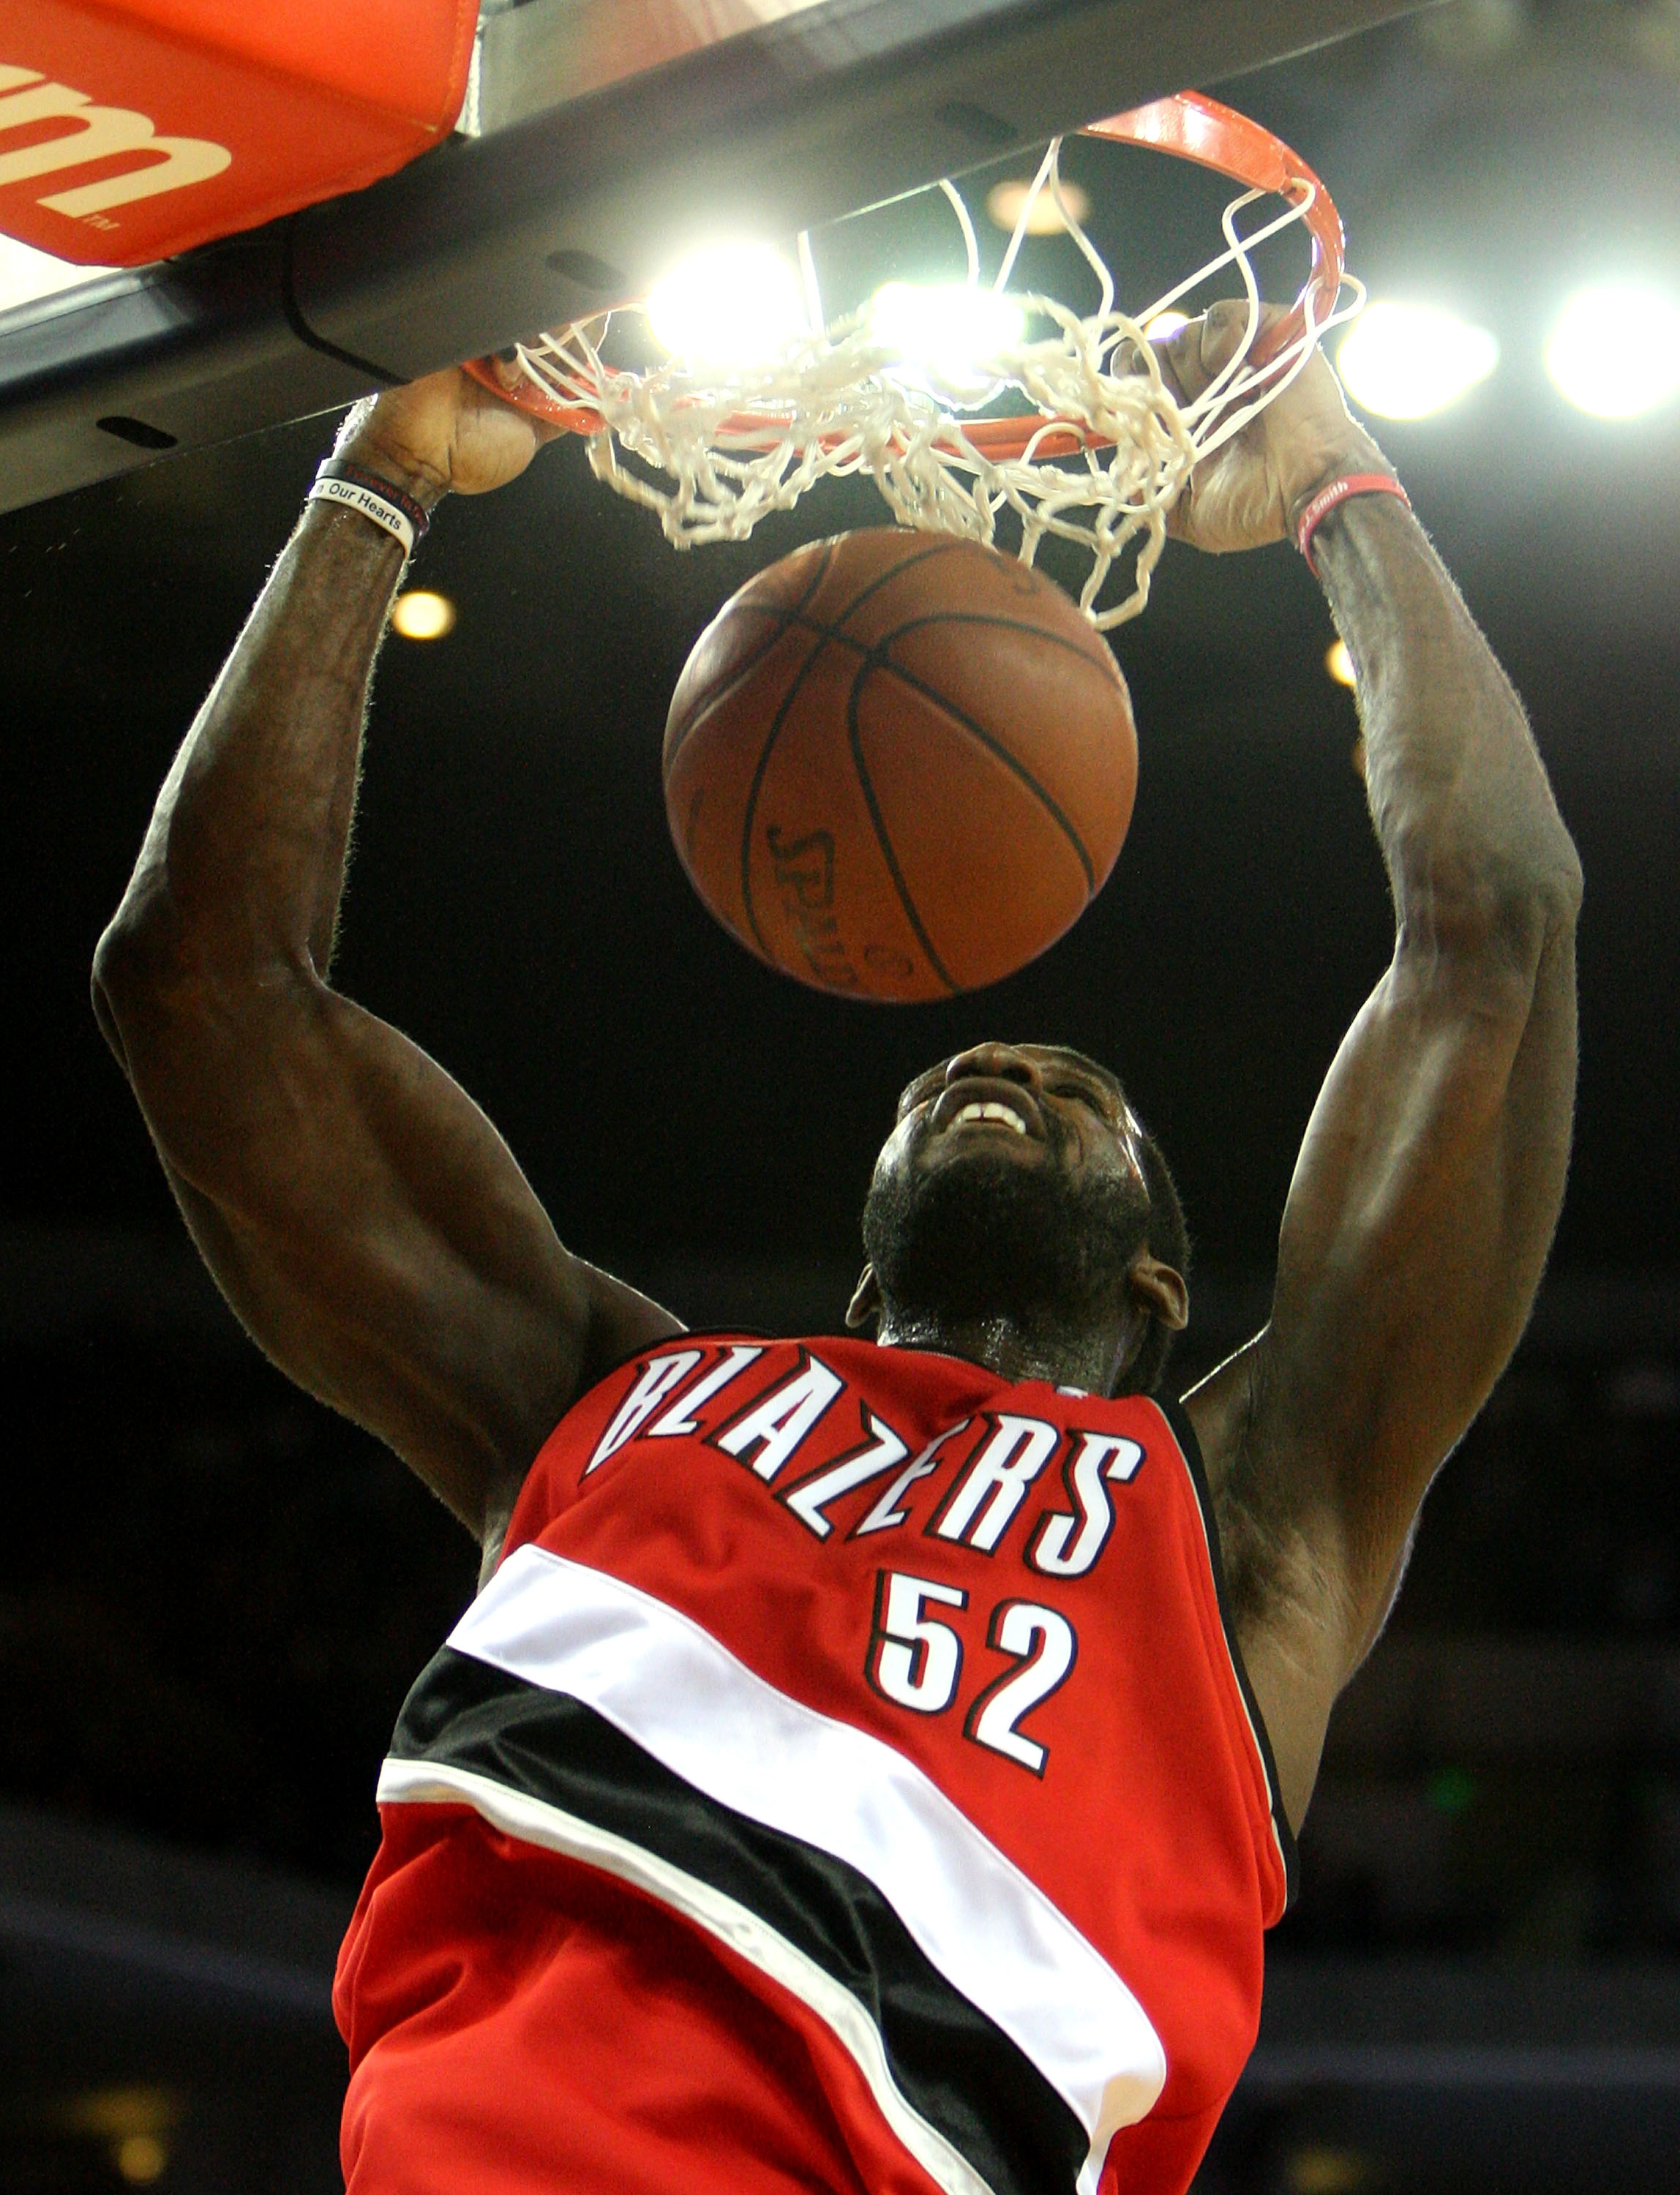 OAKLAND, CA - NOVEMBER 20:  Greg Oden #52 of the Portland Trail Blazers dunks against the Golden State Warriors during an NBA game at Oracle Arena on November 20, 2009 in Oakland, California.  (Photo by Jed Jacobsohn/Getty Images)